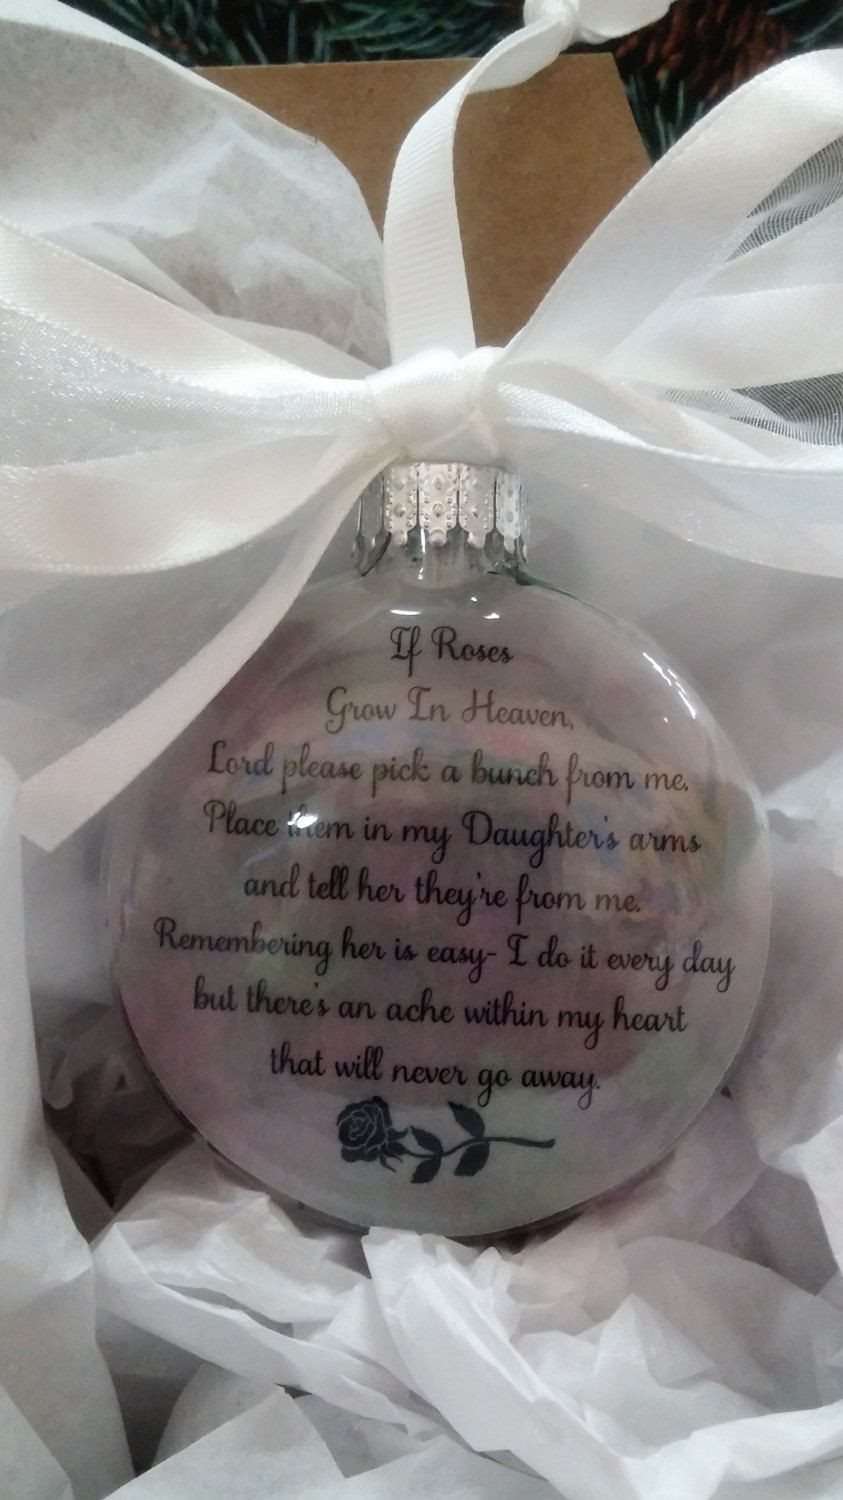 Memorial Gifts For Loss Of A Child
 Daughter Memorial Gift "If Roses Grow In Heaven" In Memory